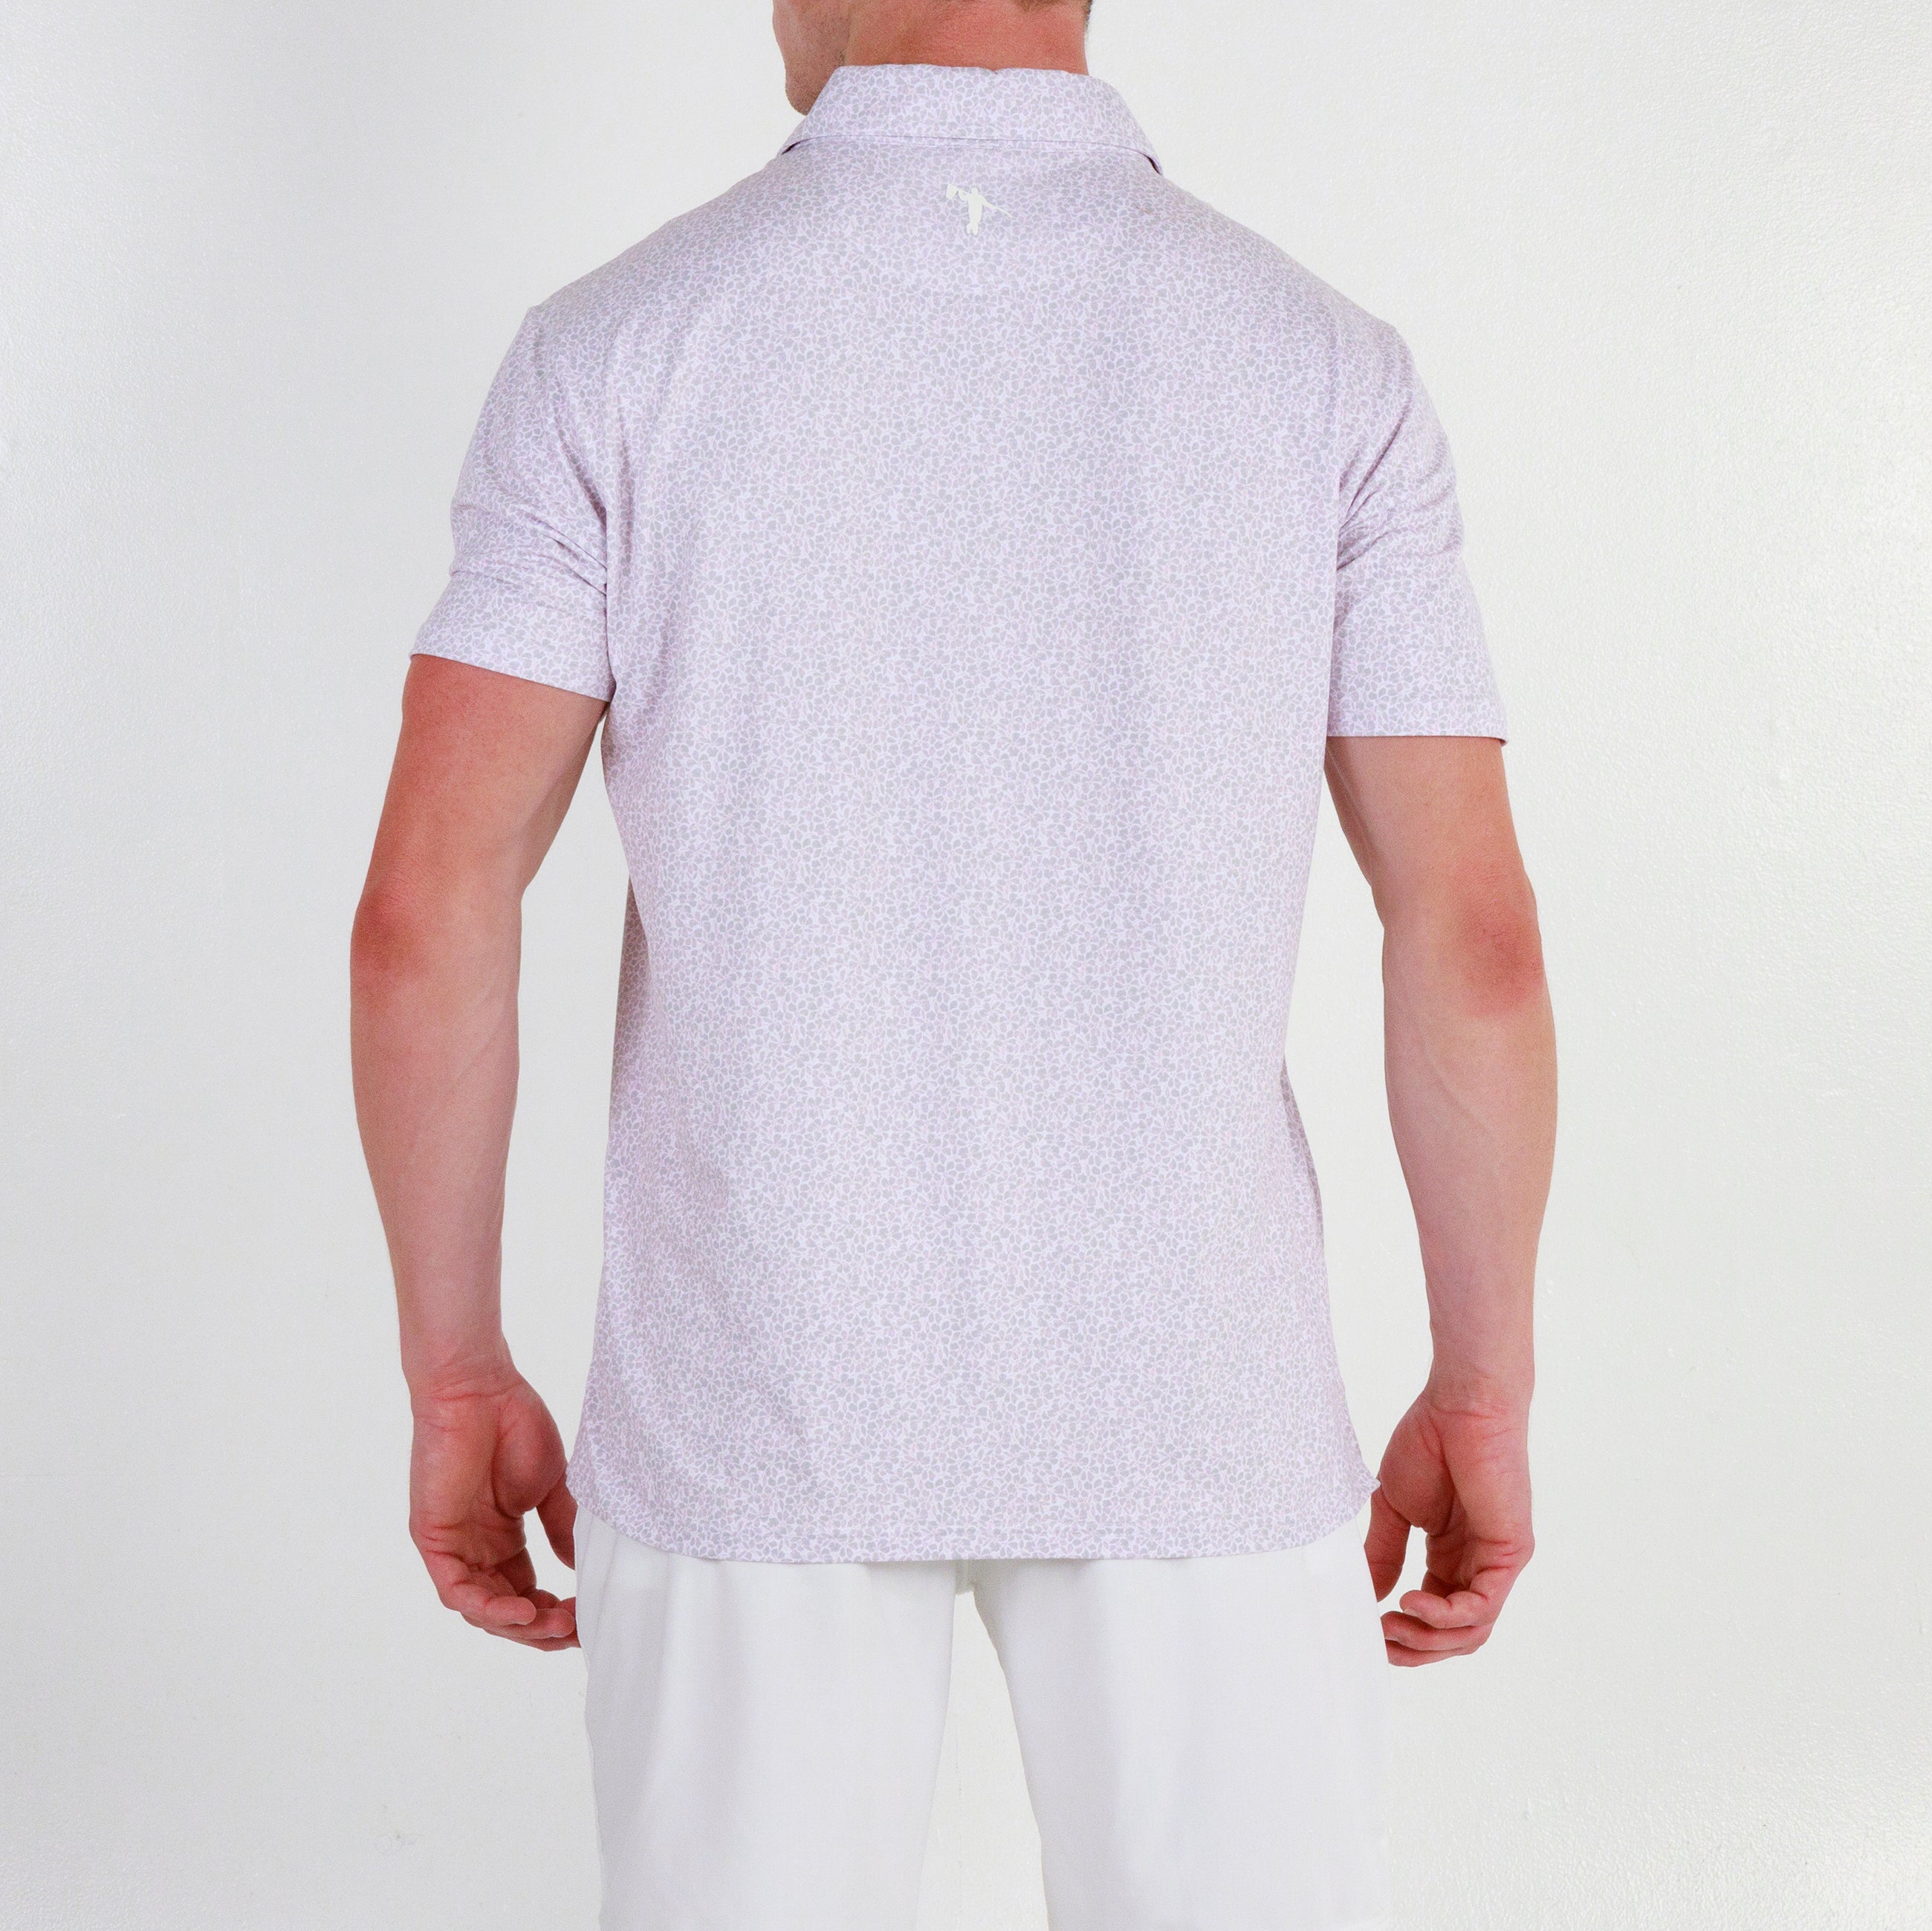 Poppy Polo - White/Orchid Pink